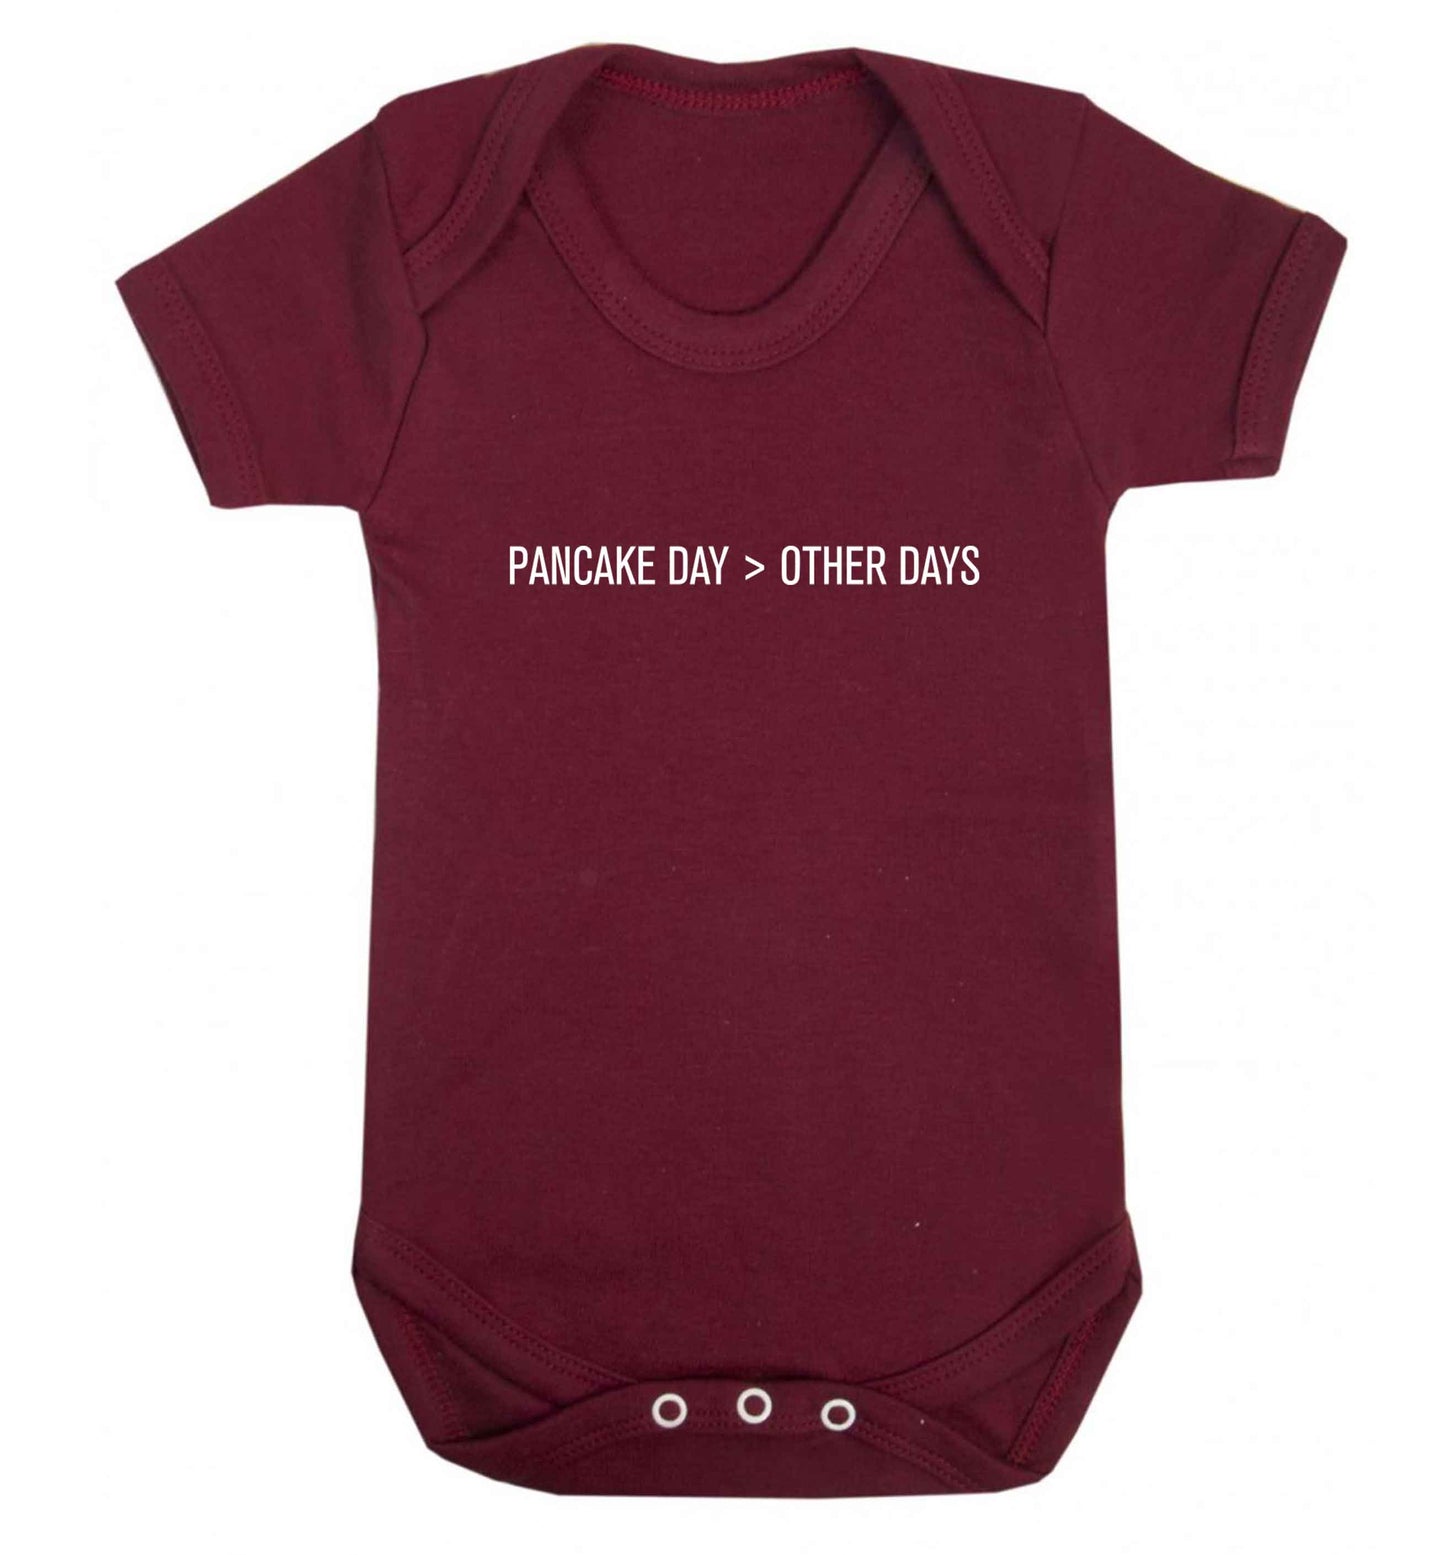 Pancake day > other days baby vest maroon 18-24 months